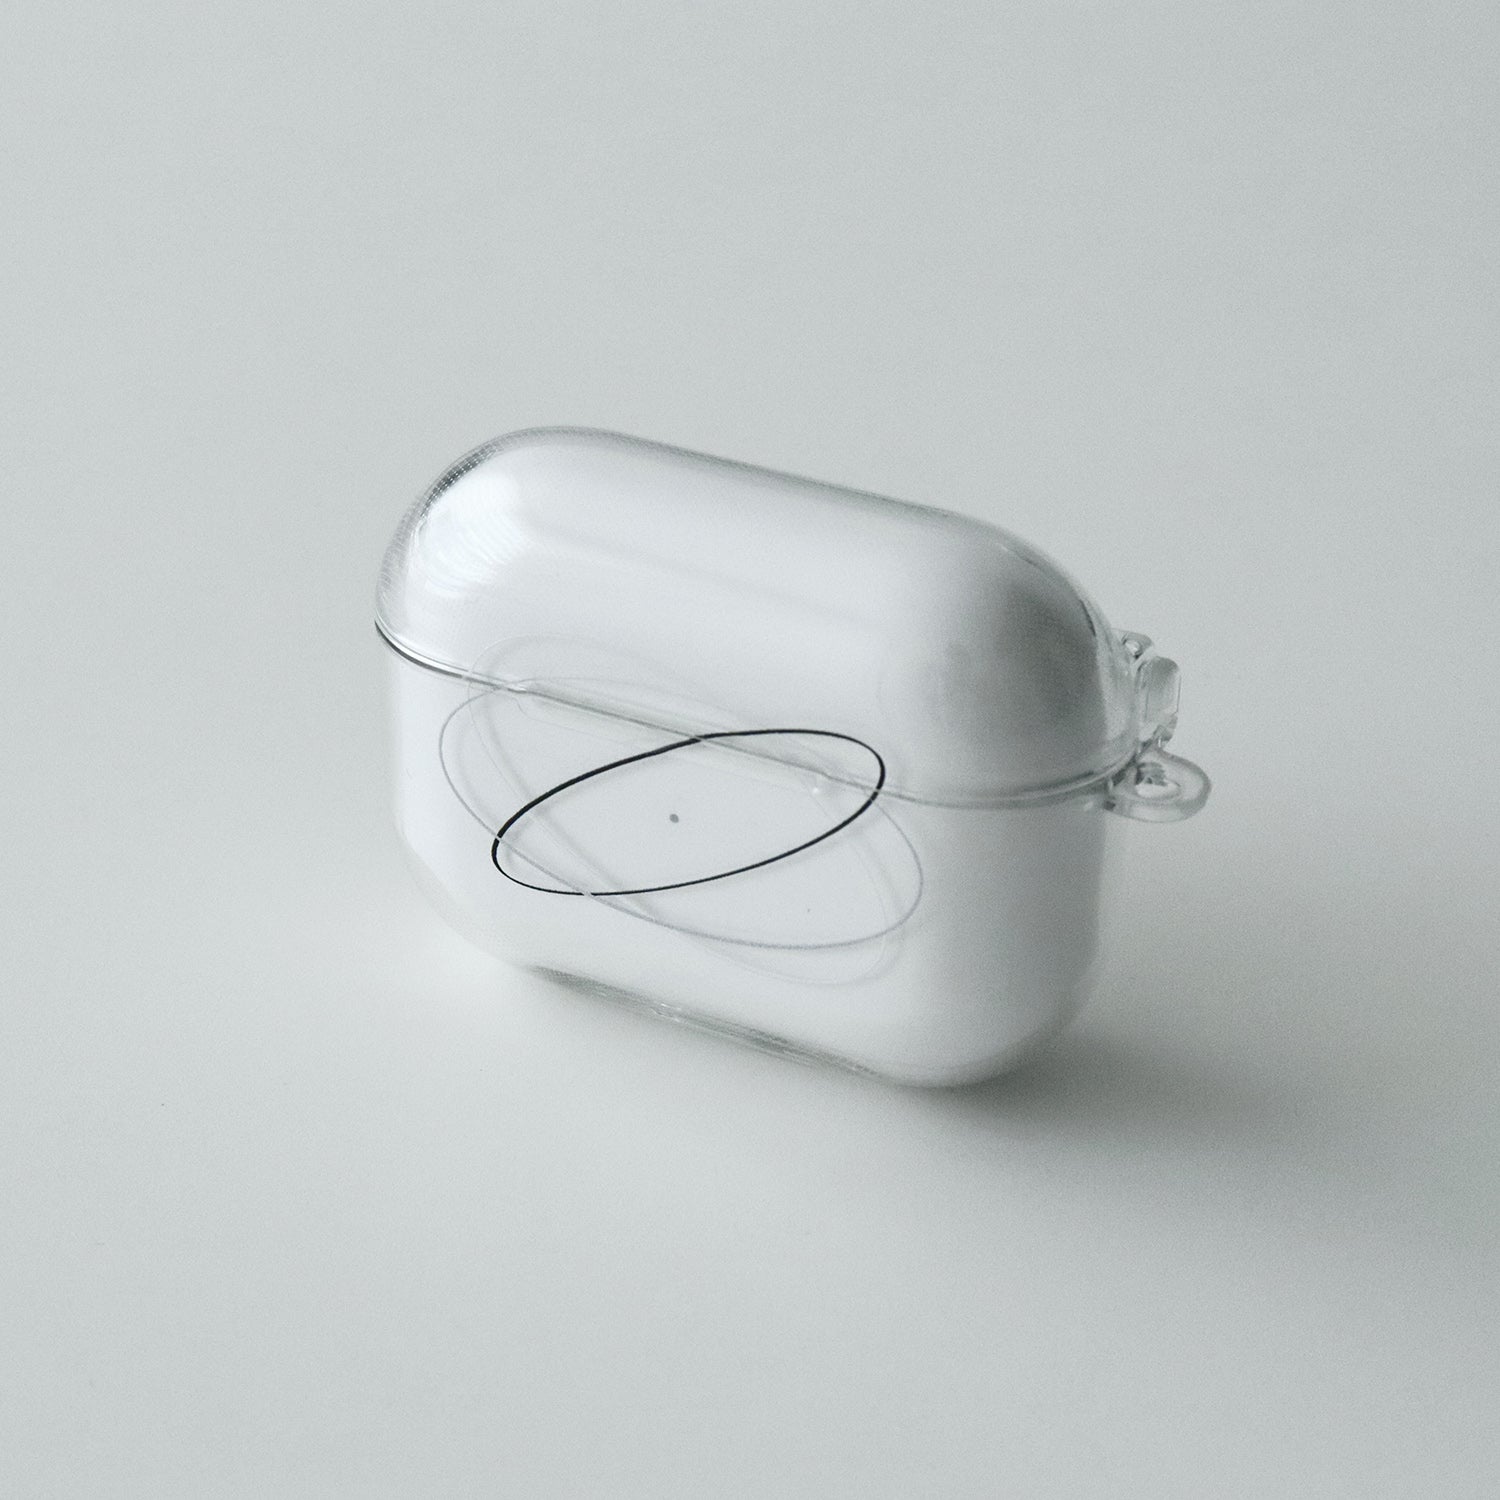 Tangle Airpods Case